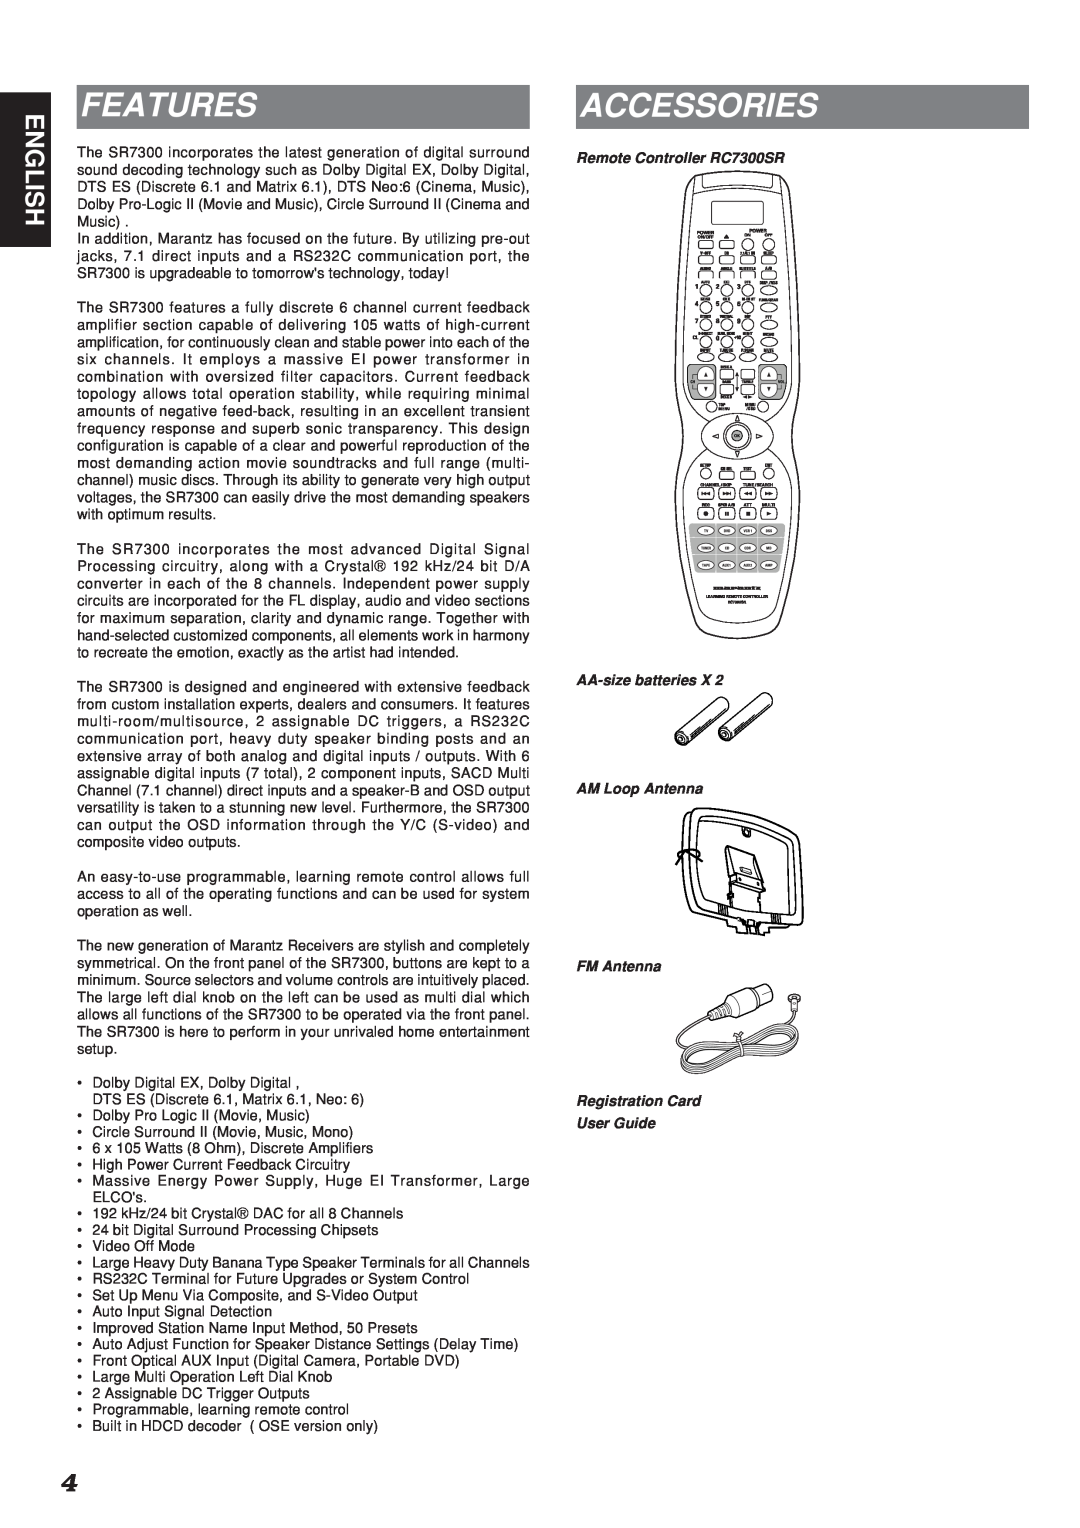 Marantz SR7300OSE manual Features, Accessories, English, Remote Controller RC7300SR, Registration Card User Guide 